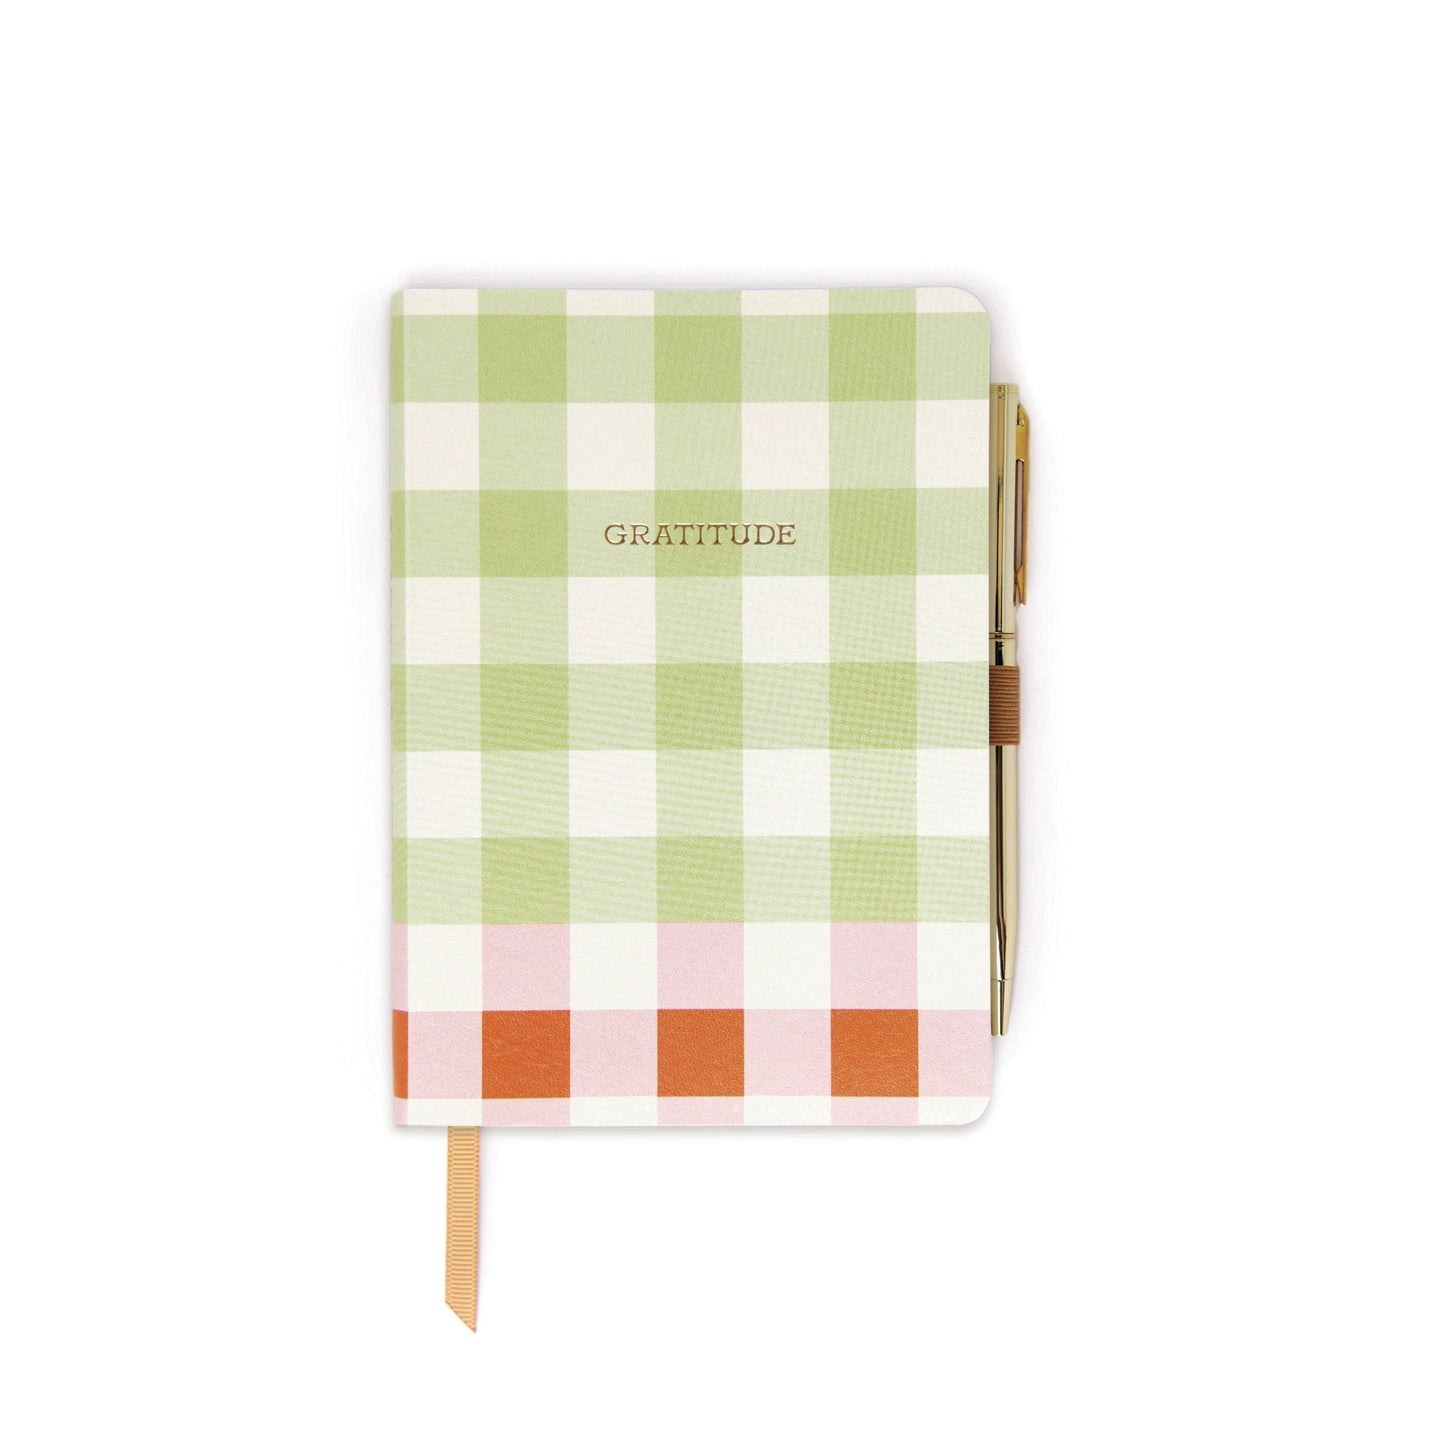 Gratitude journal with Orange gingham cover and gold pen on white background